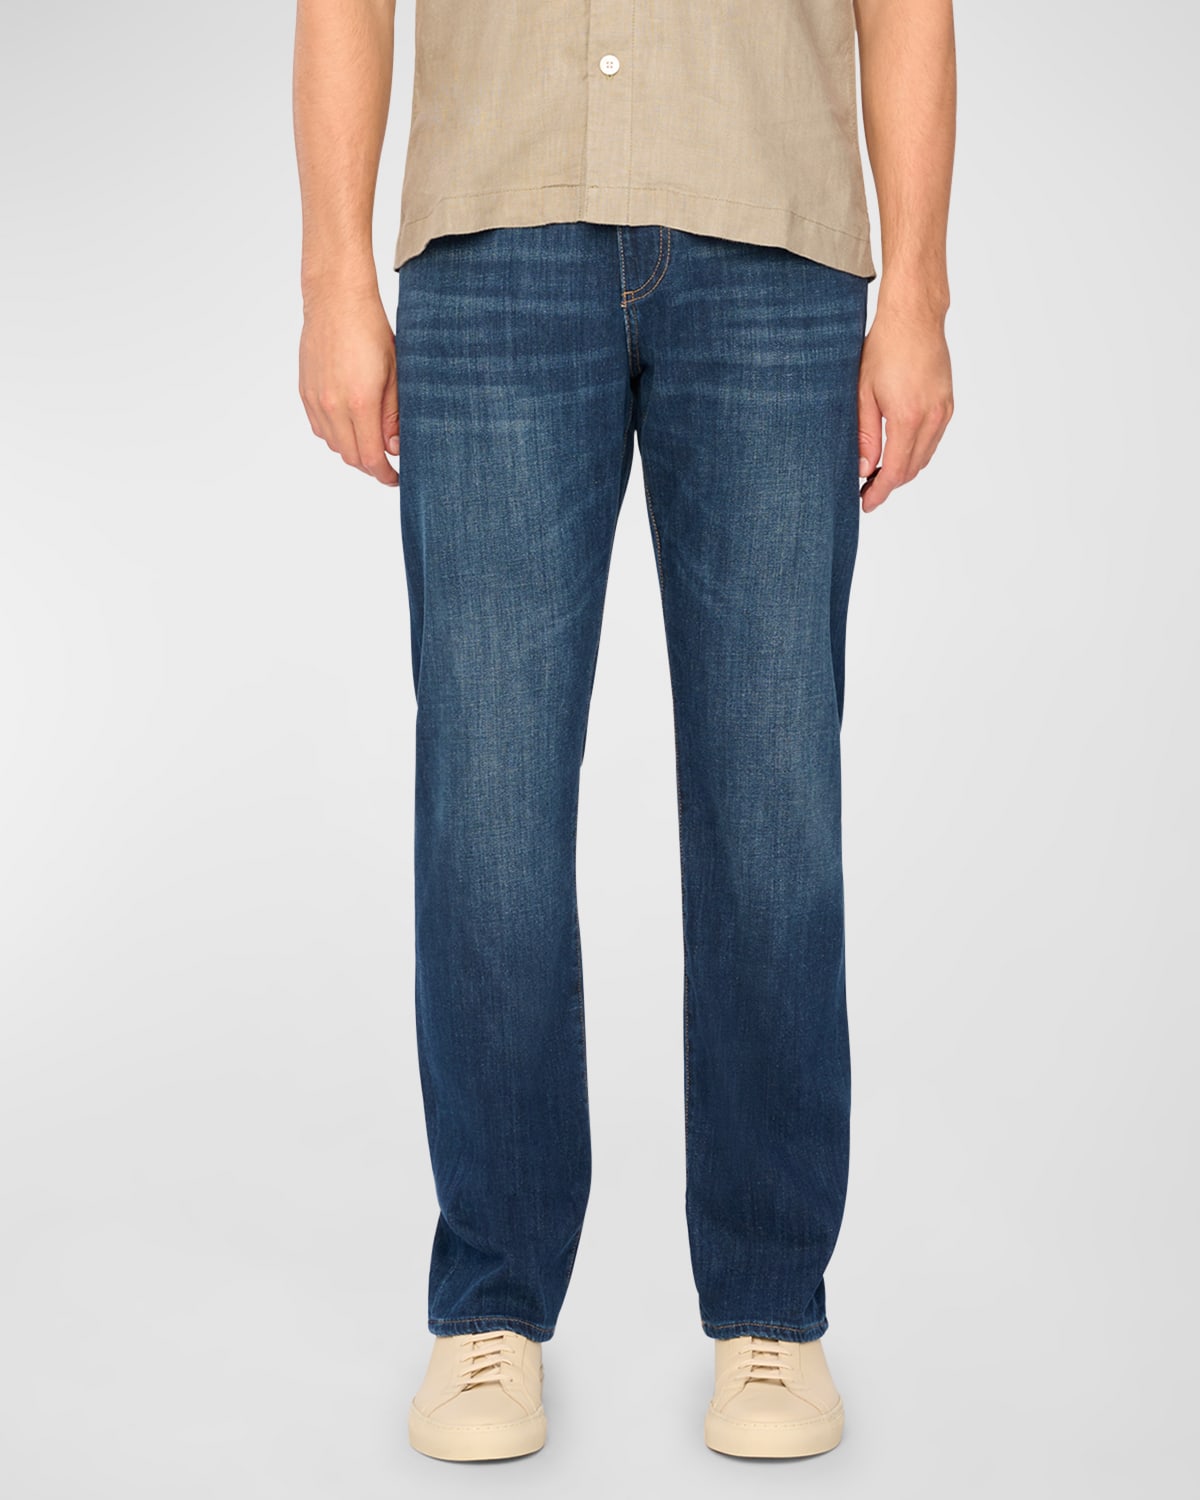 Dl1961 Men's Avery Relaxed Straight Jeans In Revierdale Park